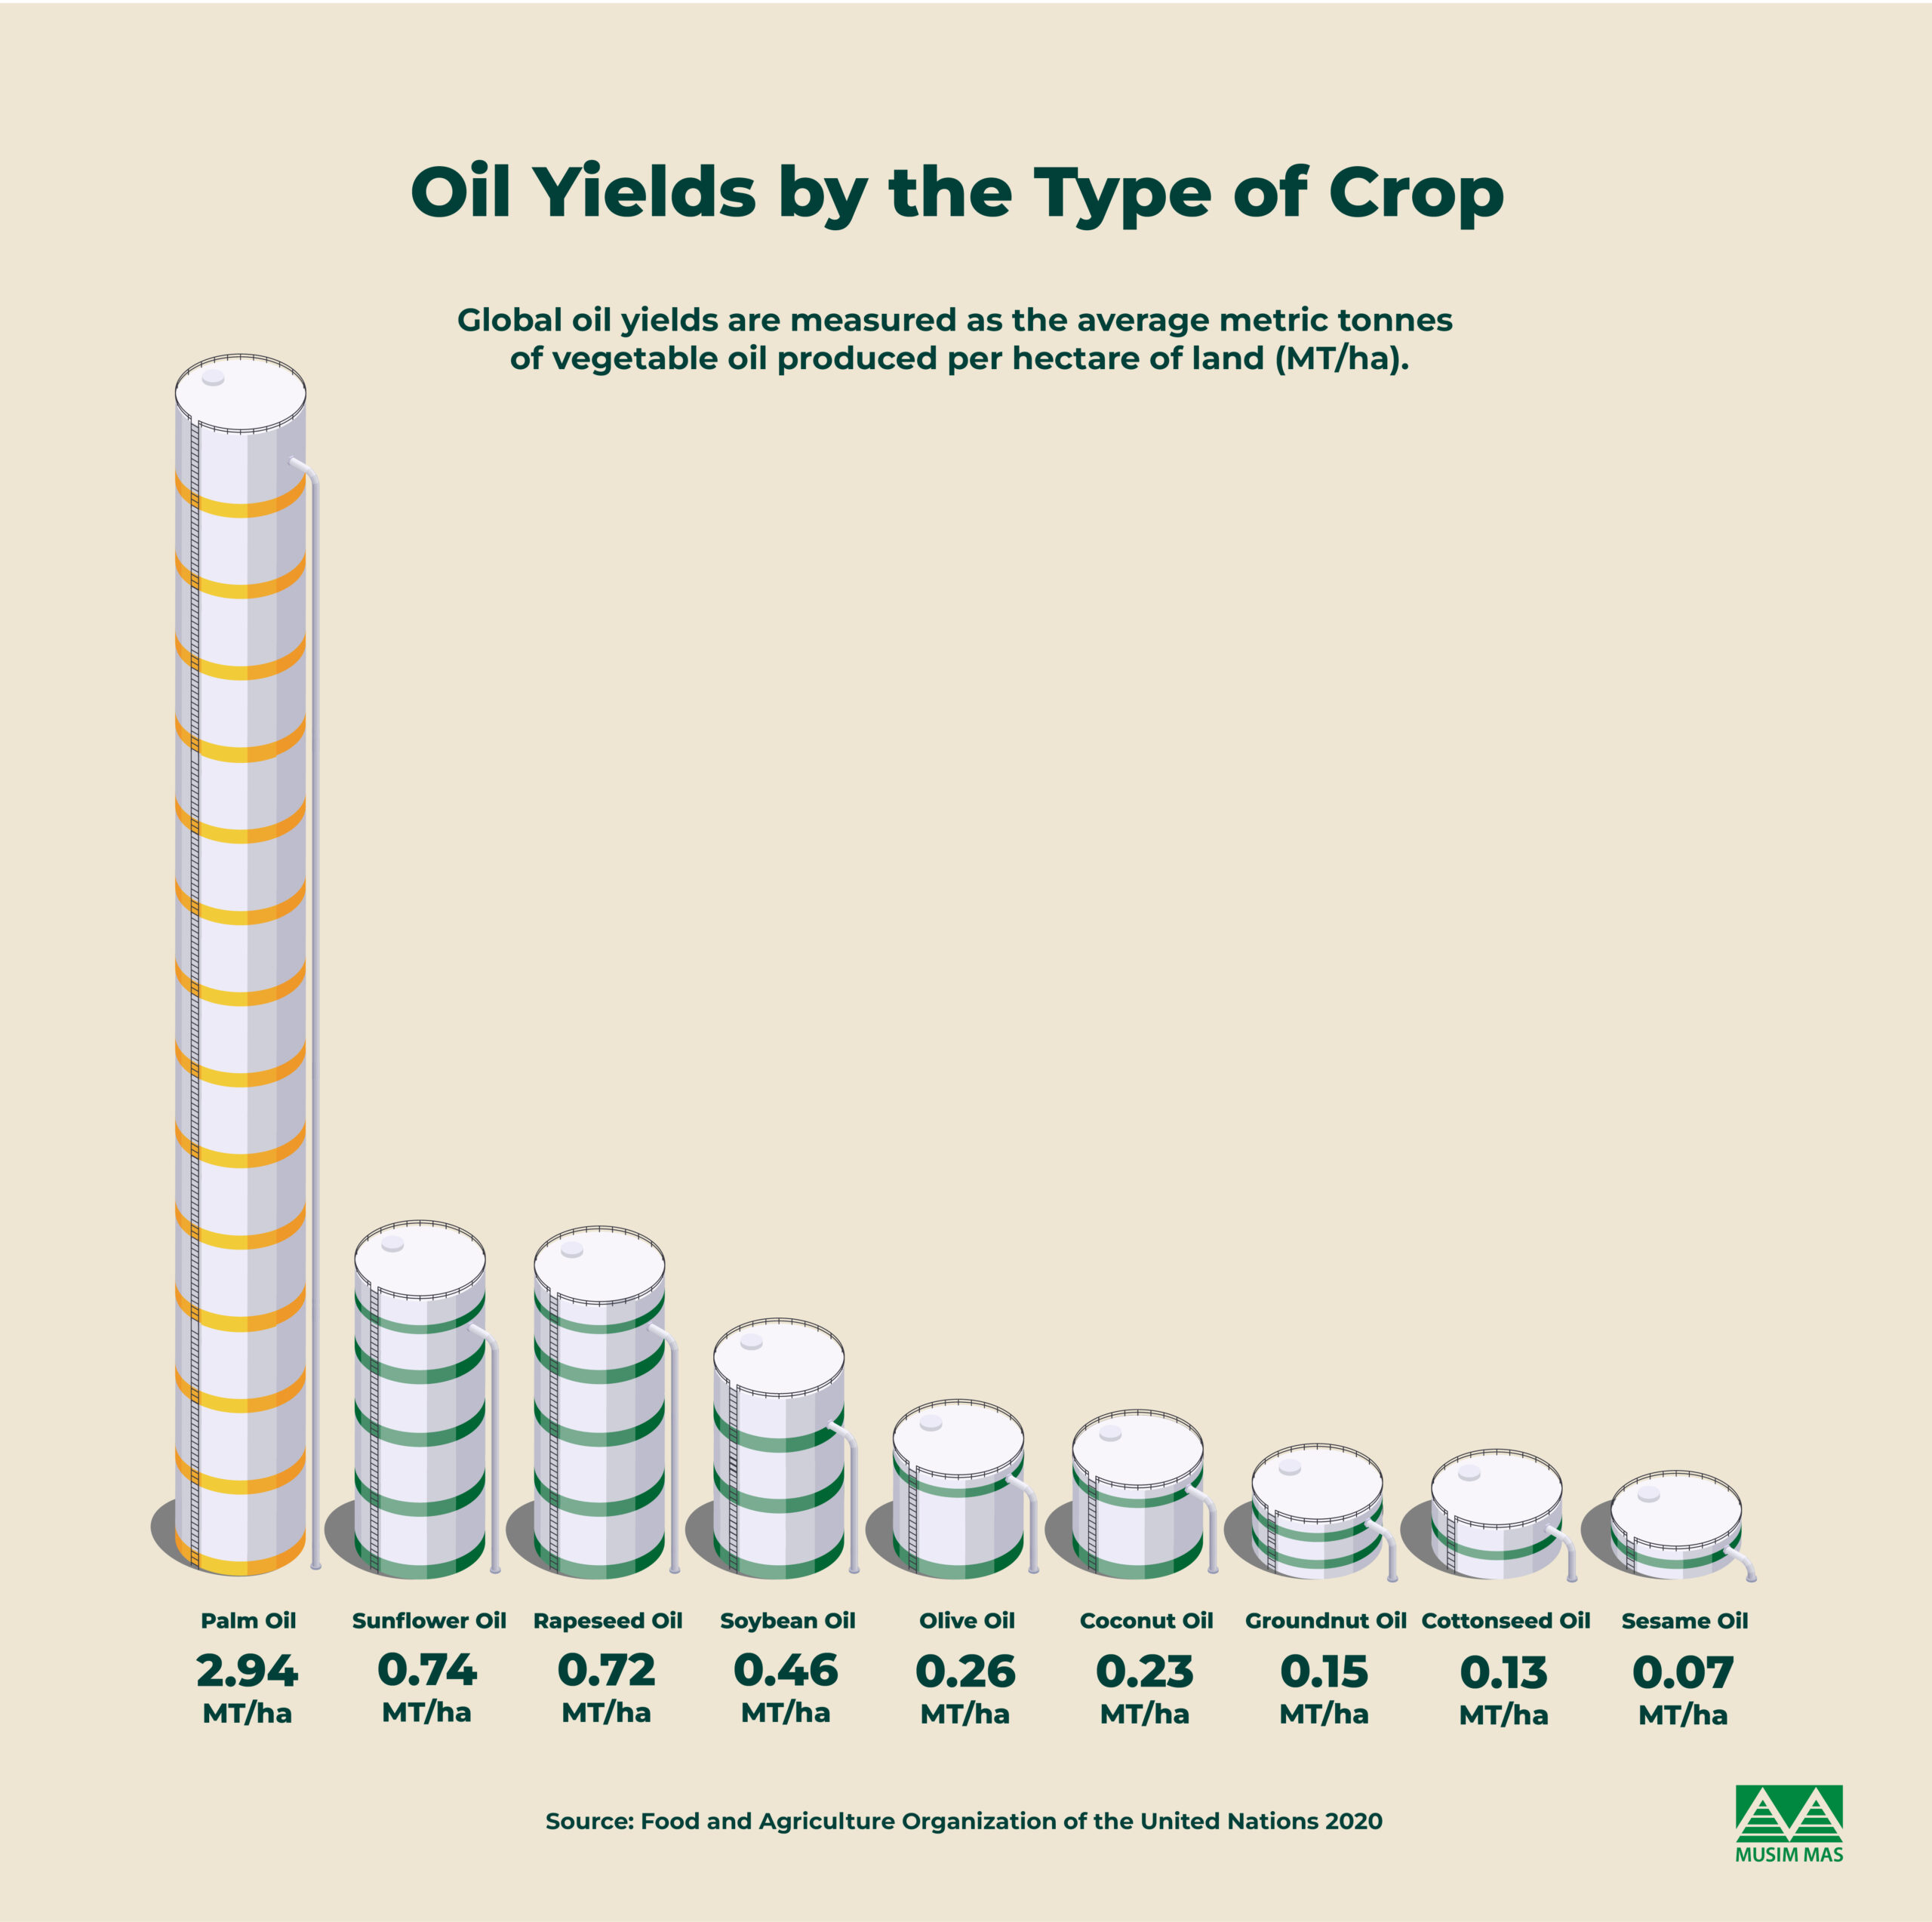 Oil yields by the type of crop